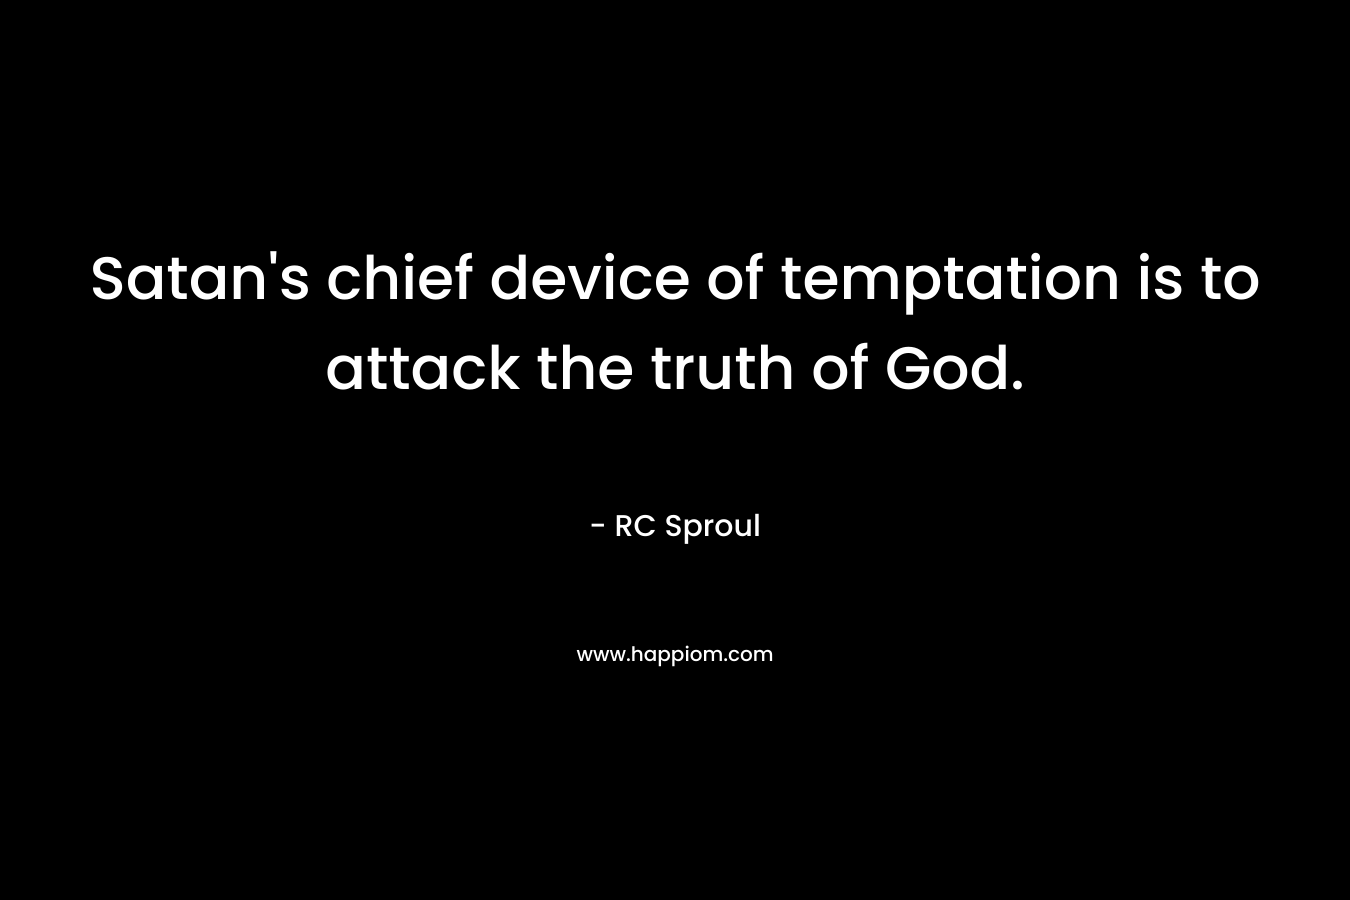 Satan’s chief device of temptation is to attack the truth of God. – RC Sproul